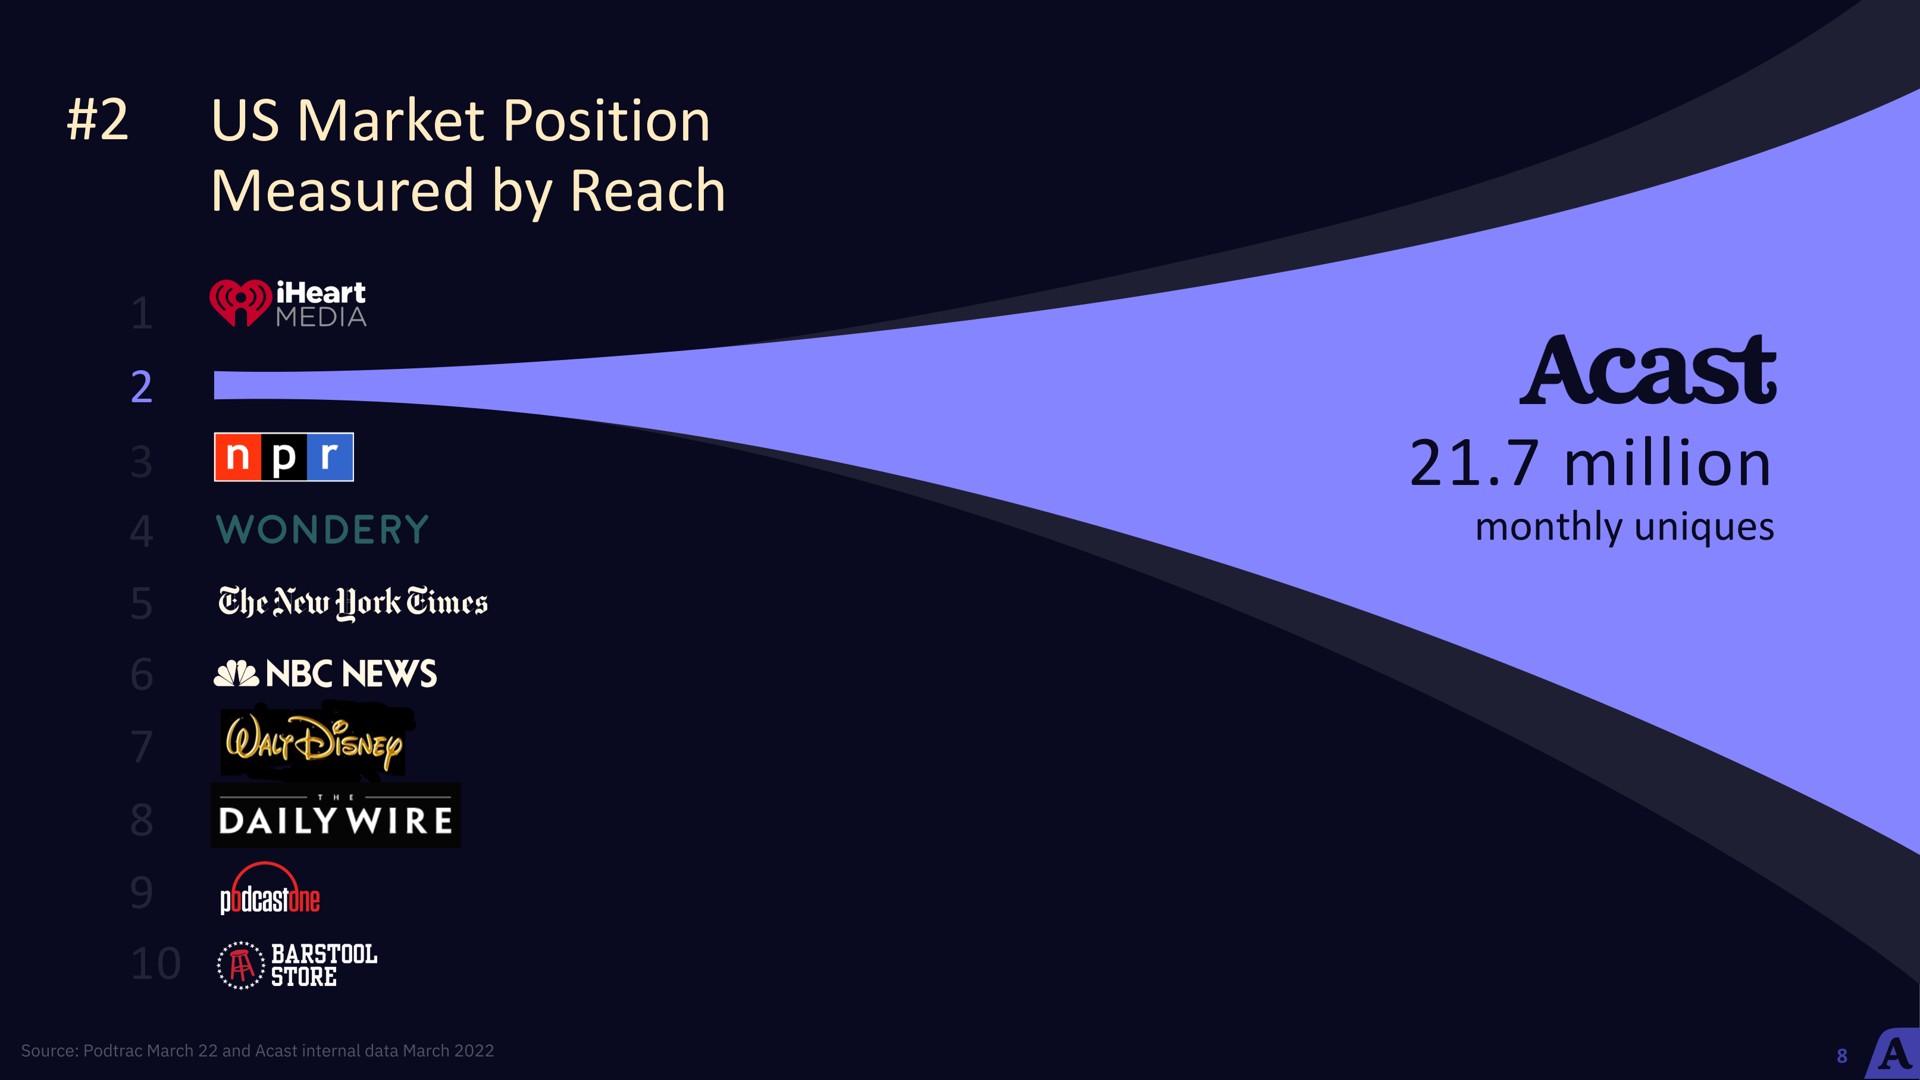 us market position measured by reach million in pir daily wire | Acast